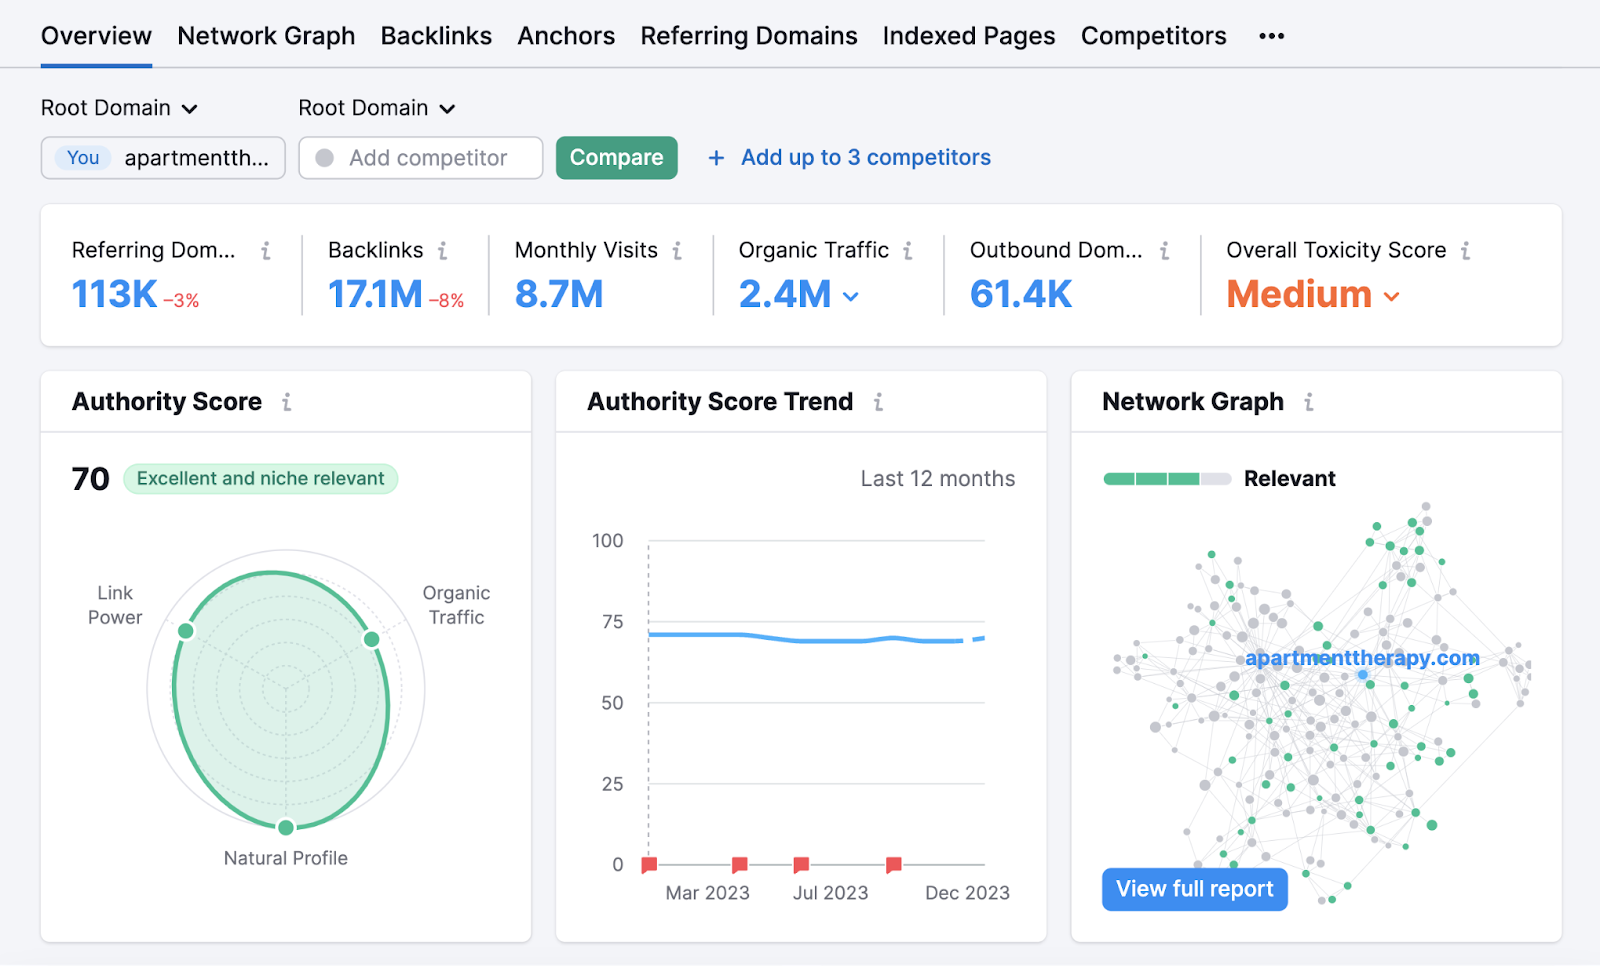 Backlink Analytics' Overview report for "apartmenttherapy.com"